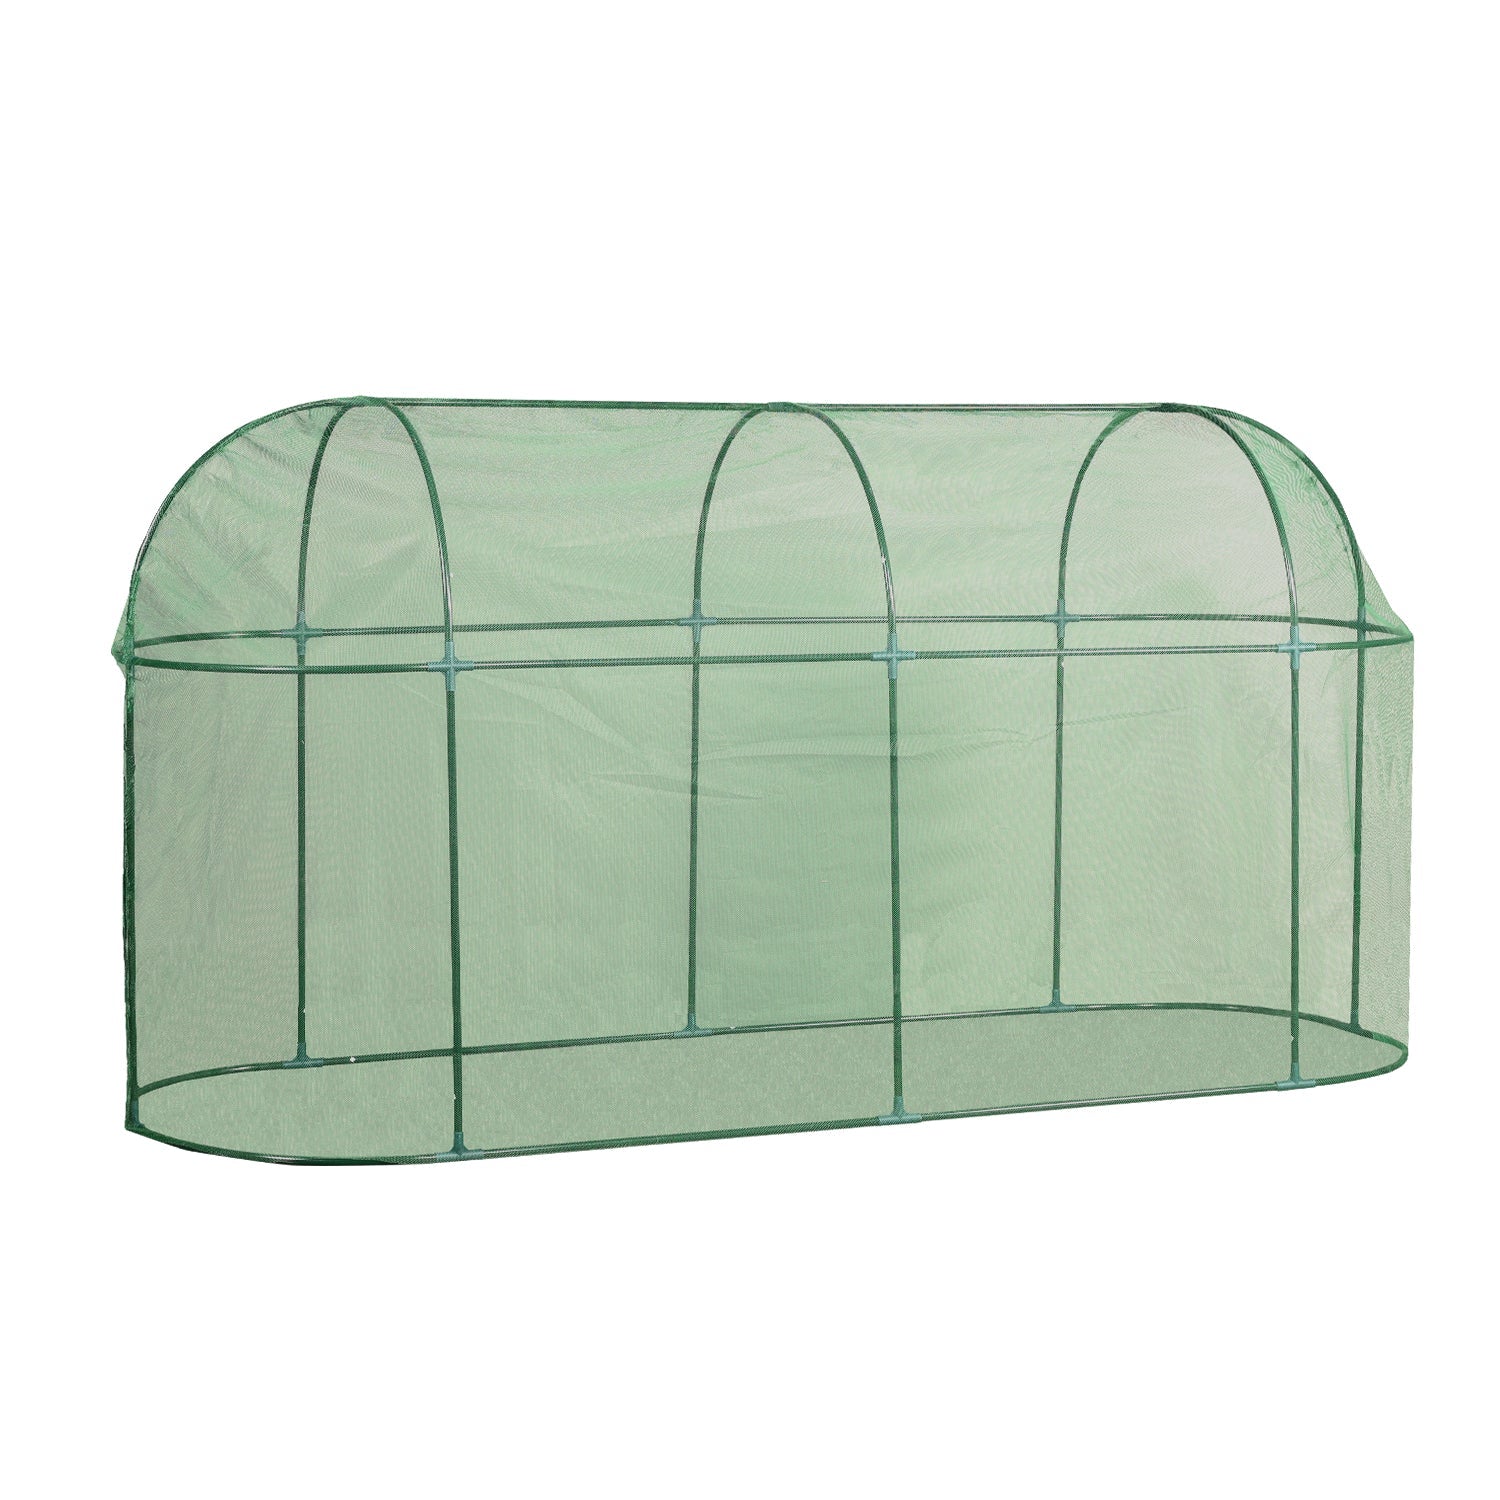 Crop Cage Plant Protection Netting Tent with Zipper for Vegetables Fruits and Plant Greenhouse Aoodor LLC 10'×3.3’×5’  